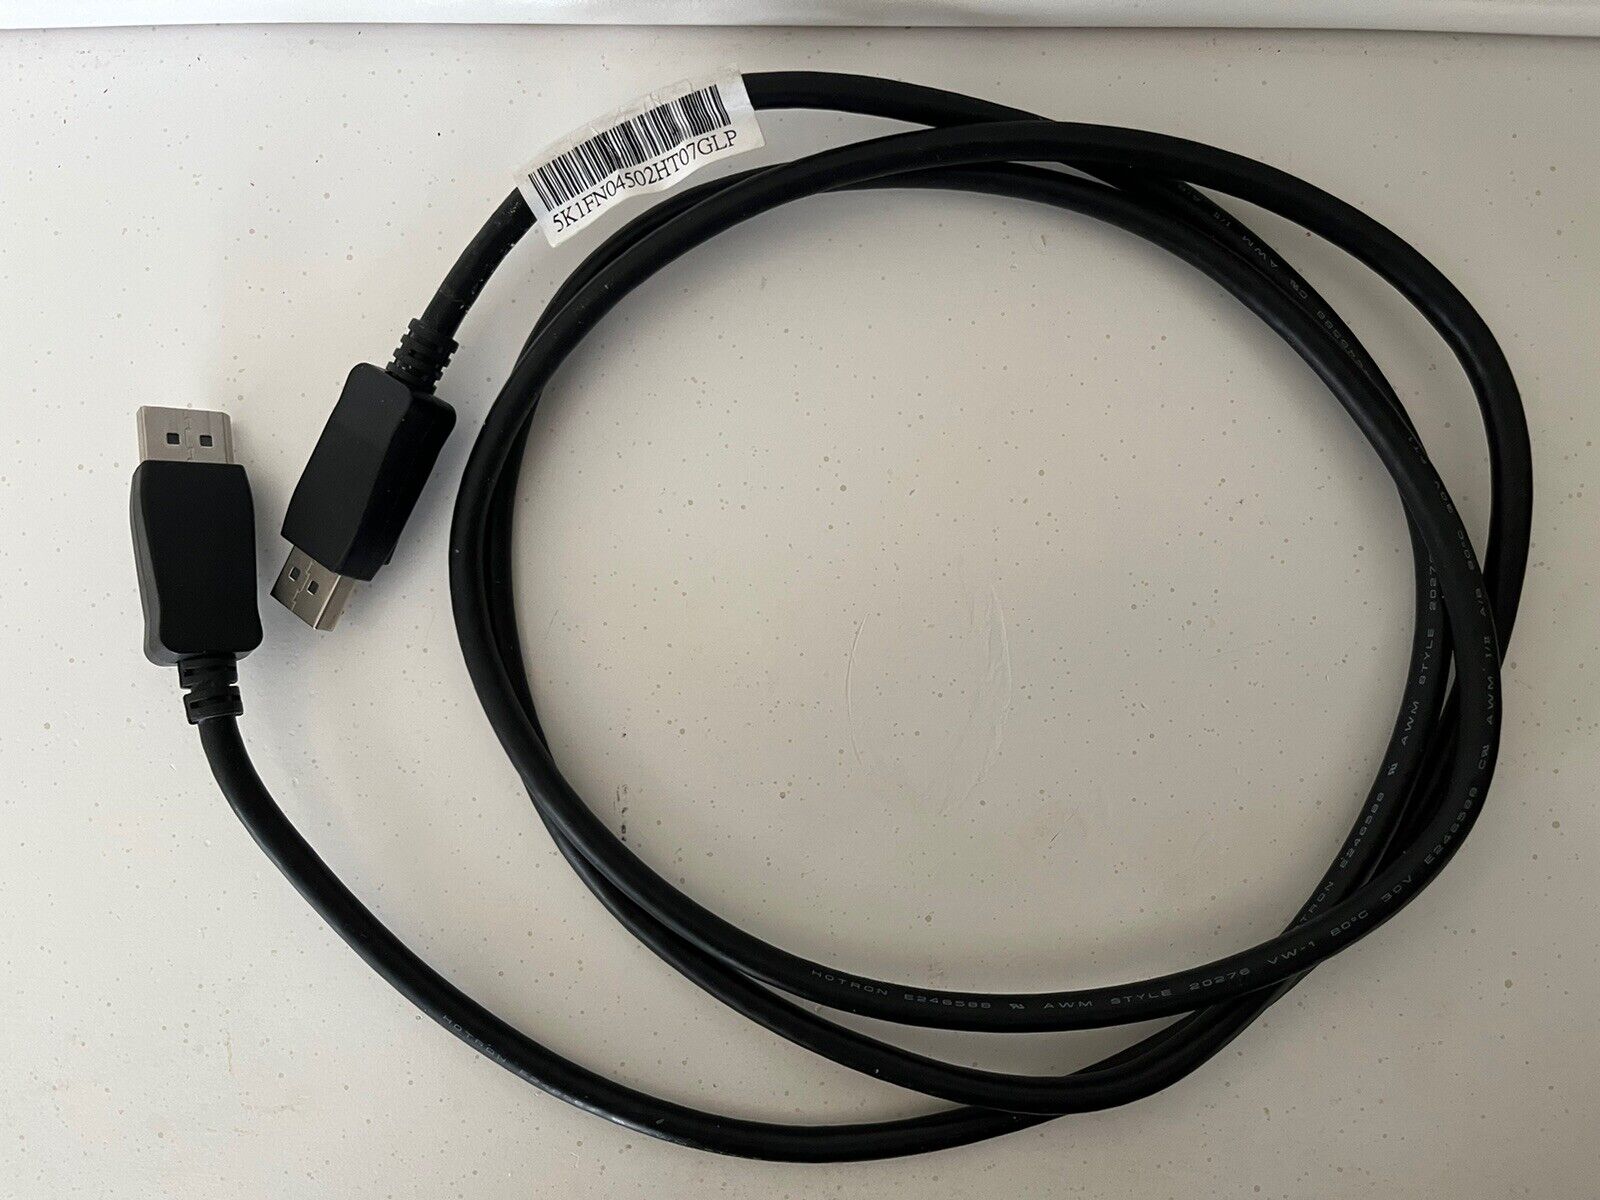 5-Ft Display Port to Display Port Cable [DP Male to DP Male]